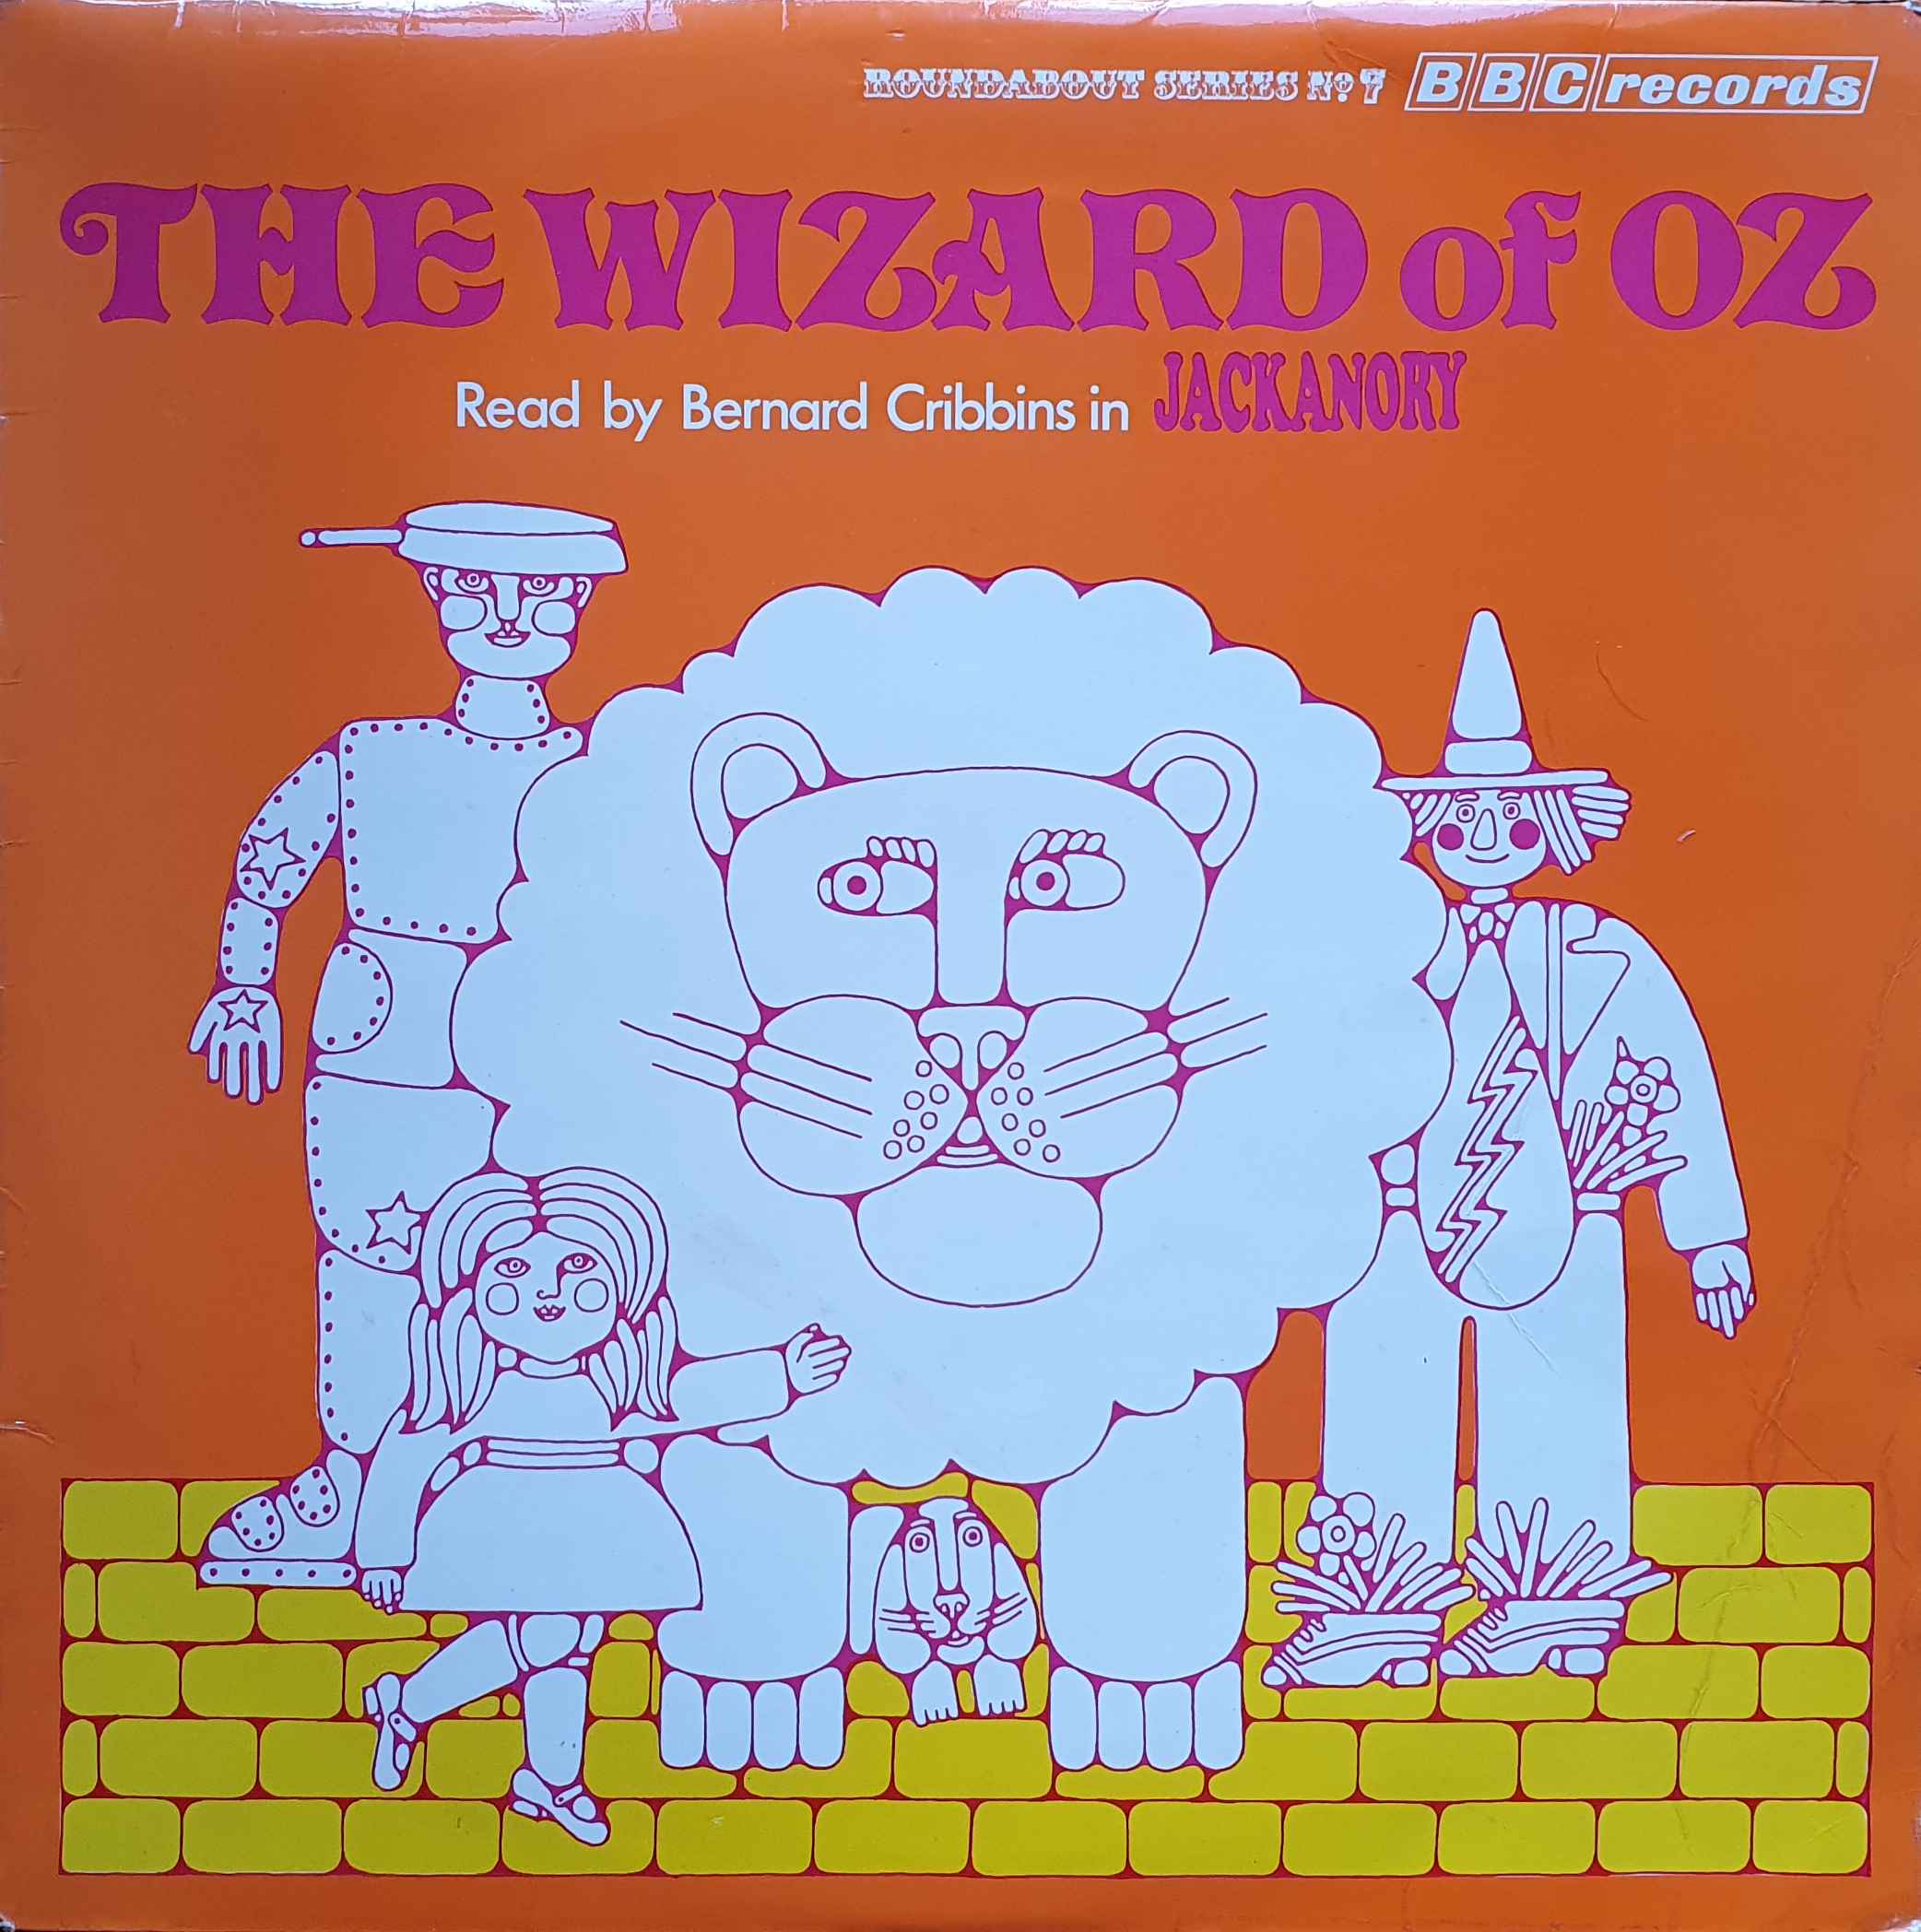 Picture of Wizard of oz by artist Bernard Cribbins from the BBC albums - Records and Tapes library